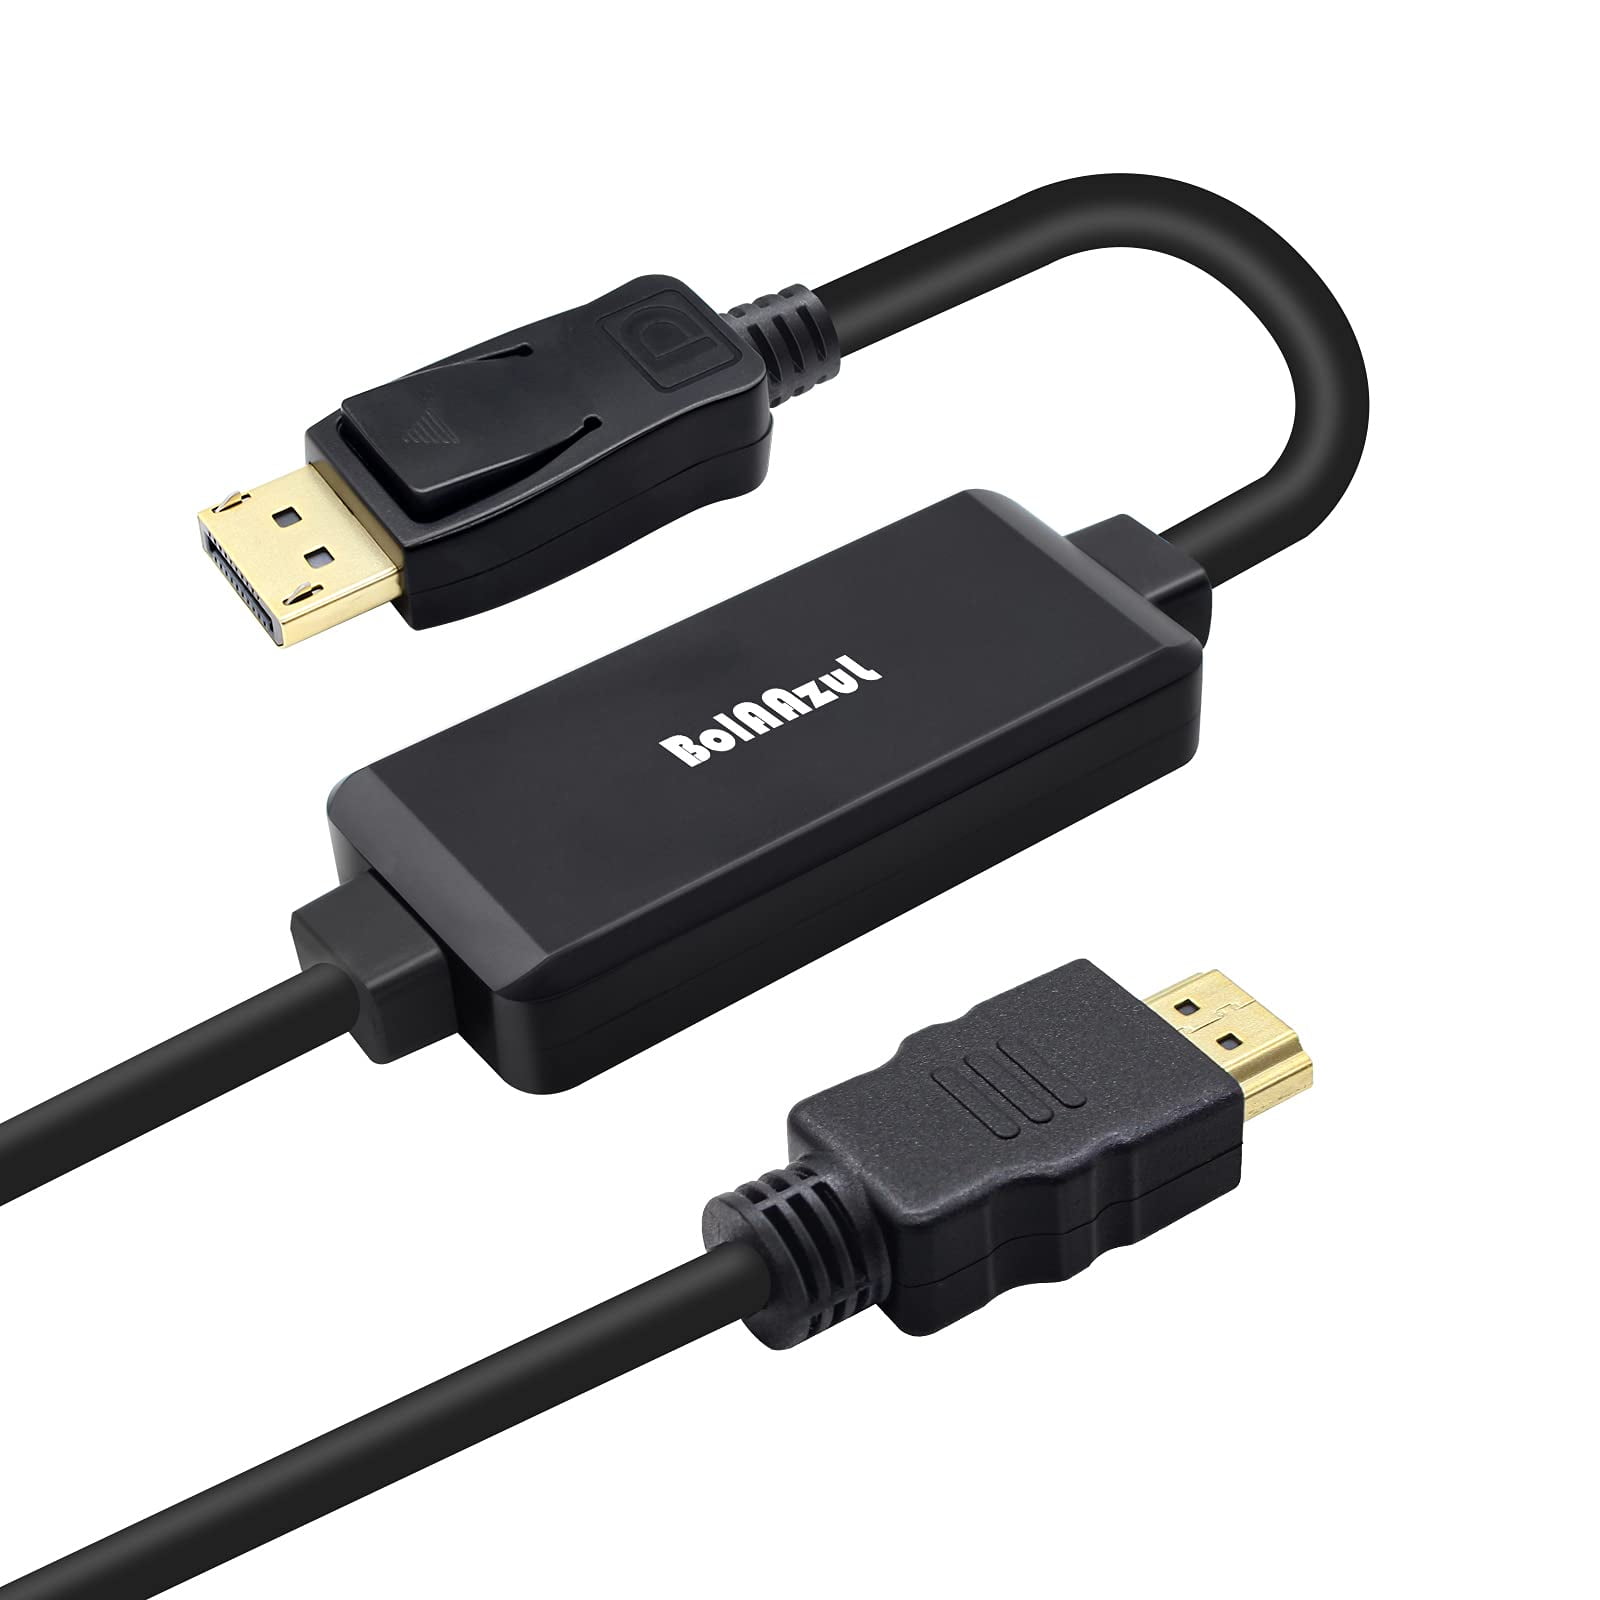 Active 4K HDMI to Displayport Active Cable 4K@30Hz HDMI in to DP out for PC laptop PS3 DVD, HDMI Source to Adapter Cable - Walmart.com